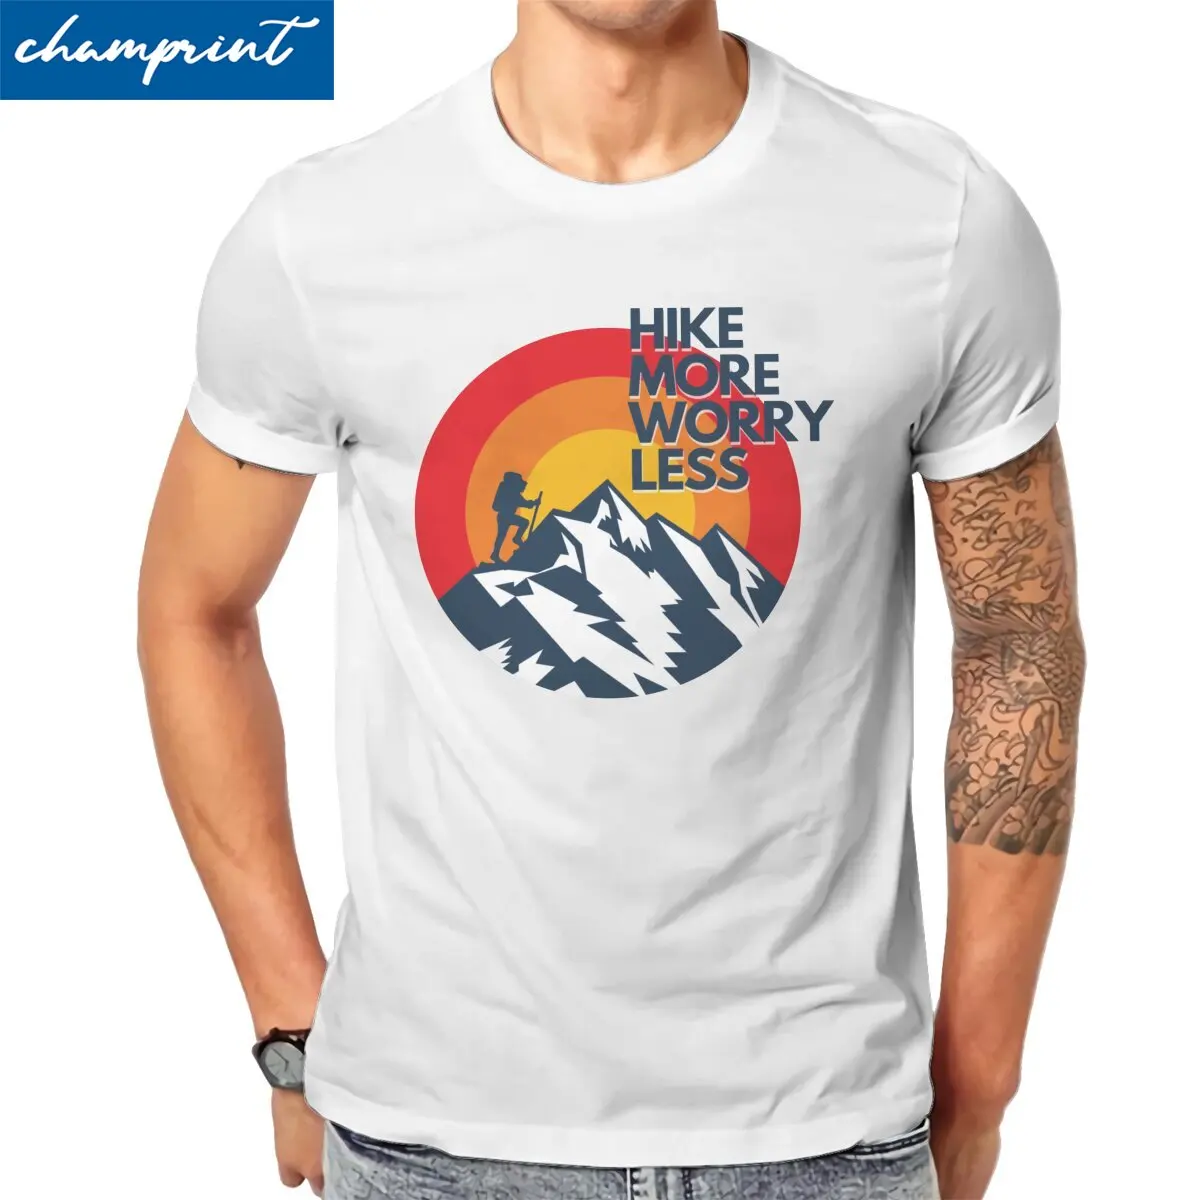 

Hike More Worry Less Men's T Shirts Outdoors Explore Unique Tees Short Sleeve Crew Neck T-Shirts Graphic Printed Clothes